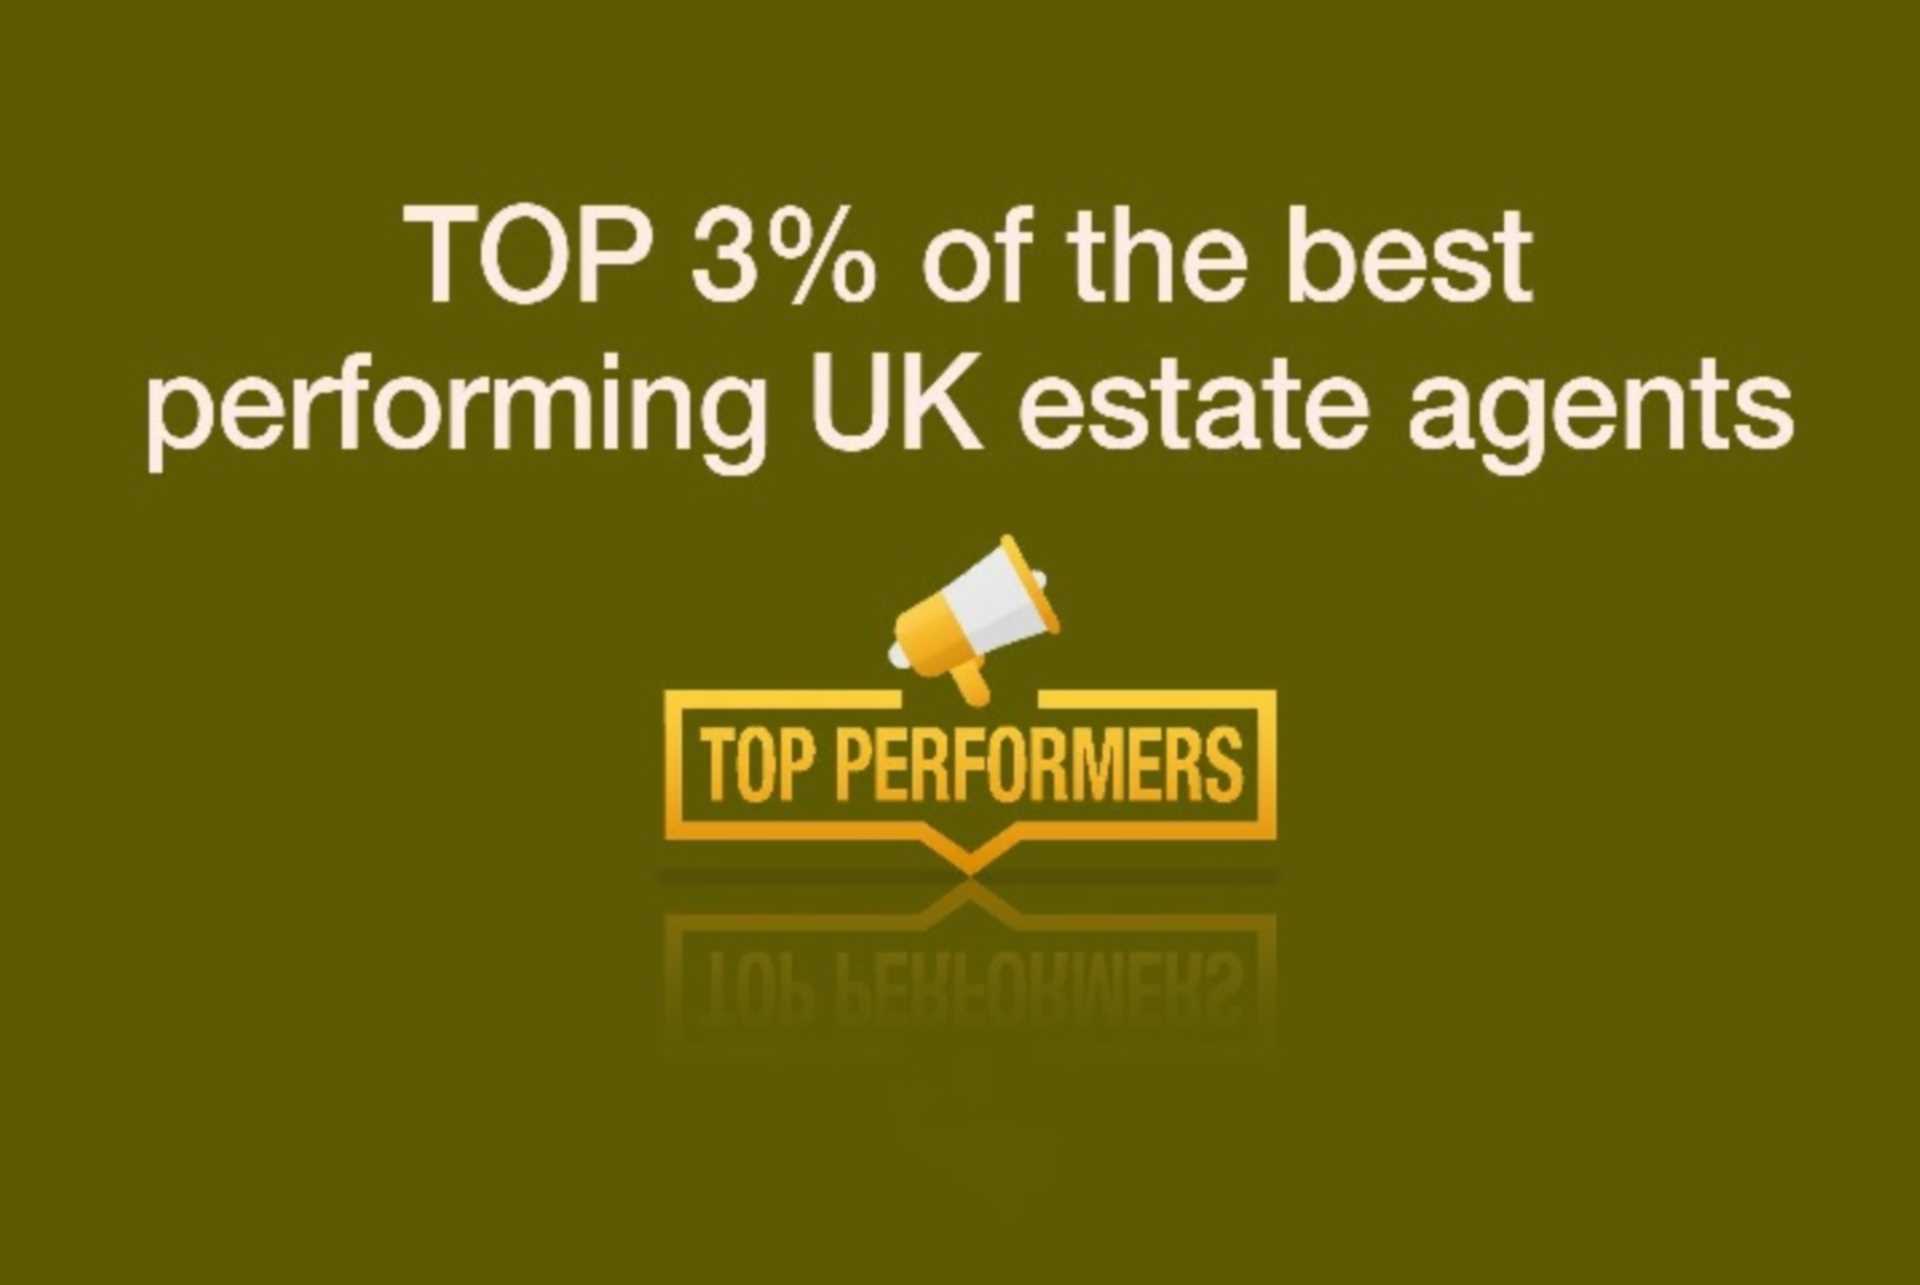 TOP 3% of the best performing UK estate agents